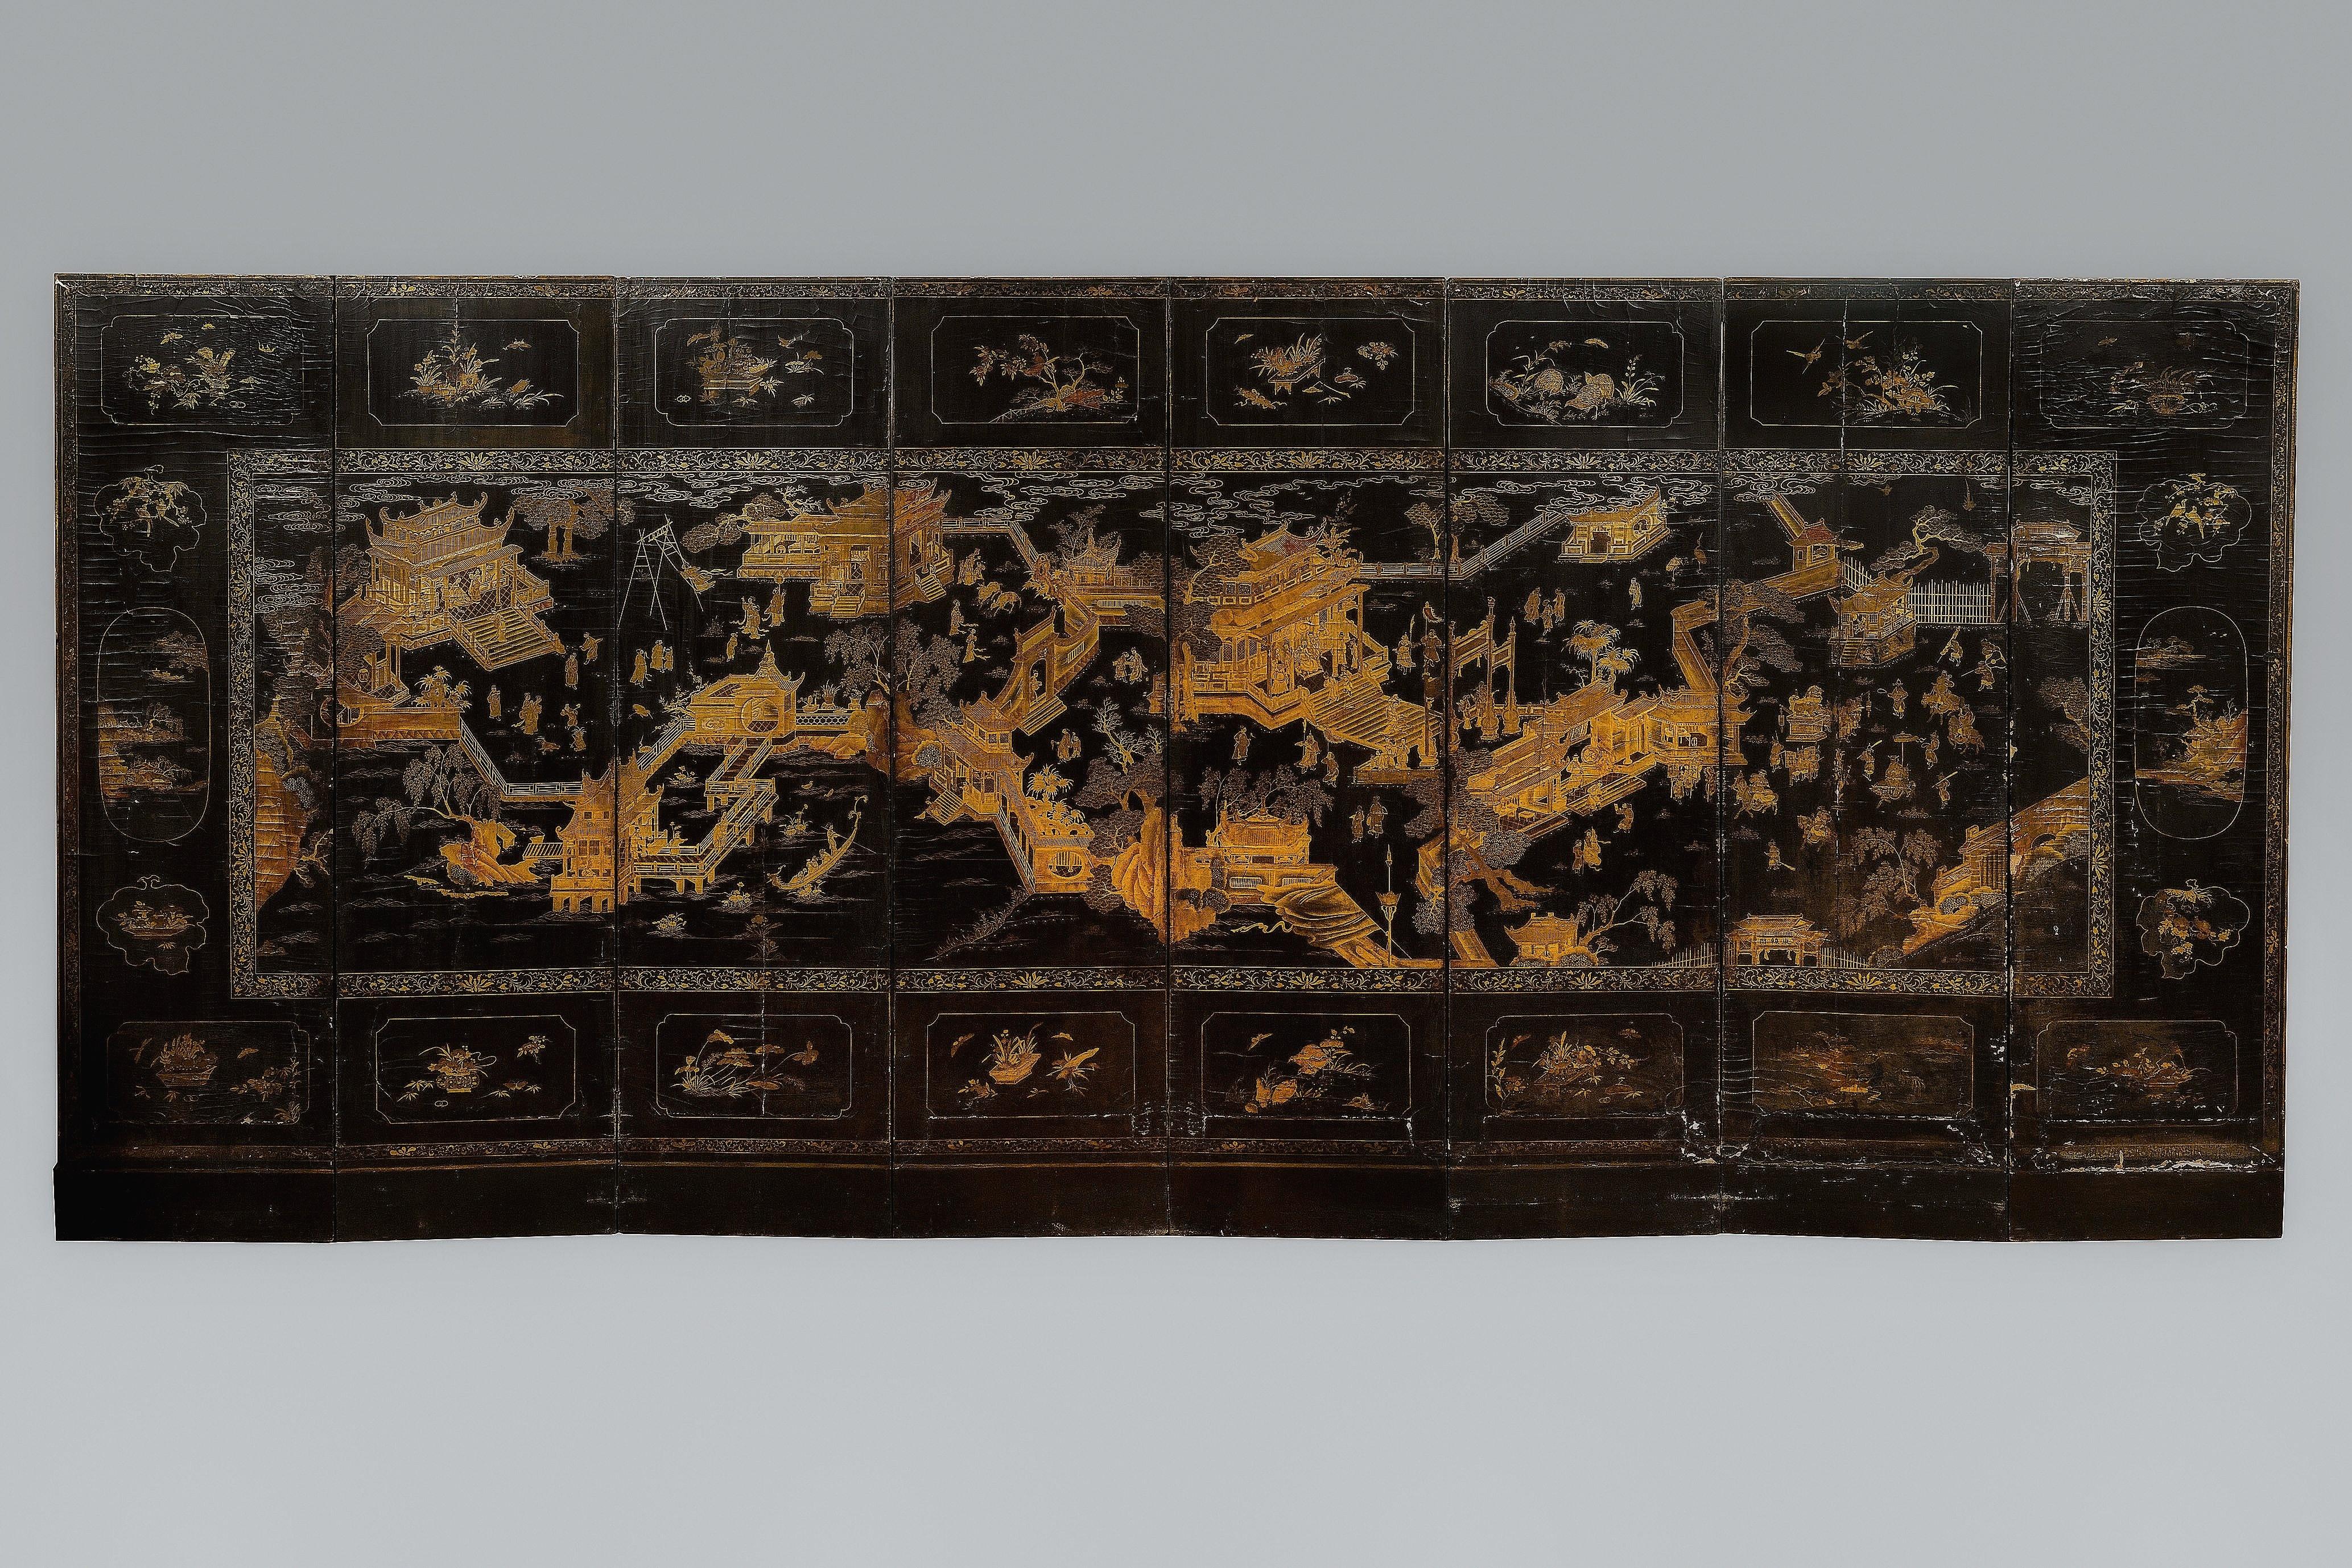 Very large eight-panel sreen with richly decorated landscape vedutas, partly architectural. Very fine execution in coromandel lacquer partially accented with gold. The screen is executed correspondingly on both sides. Large frame with Chinese scenes